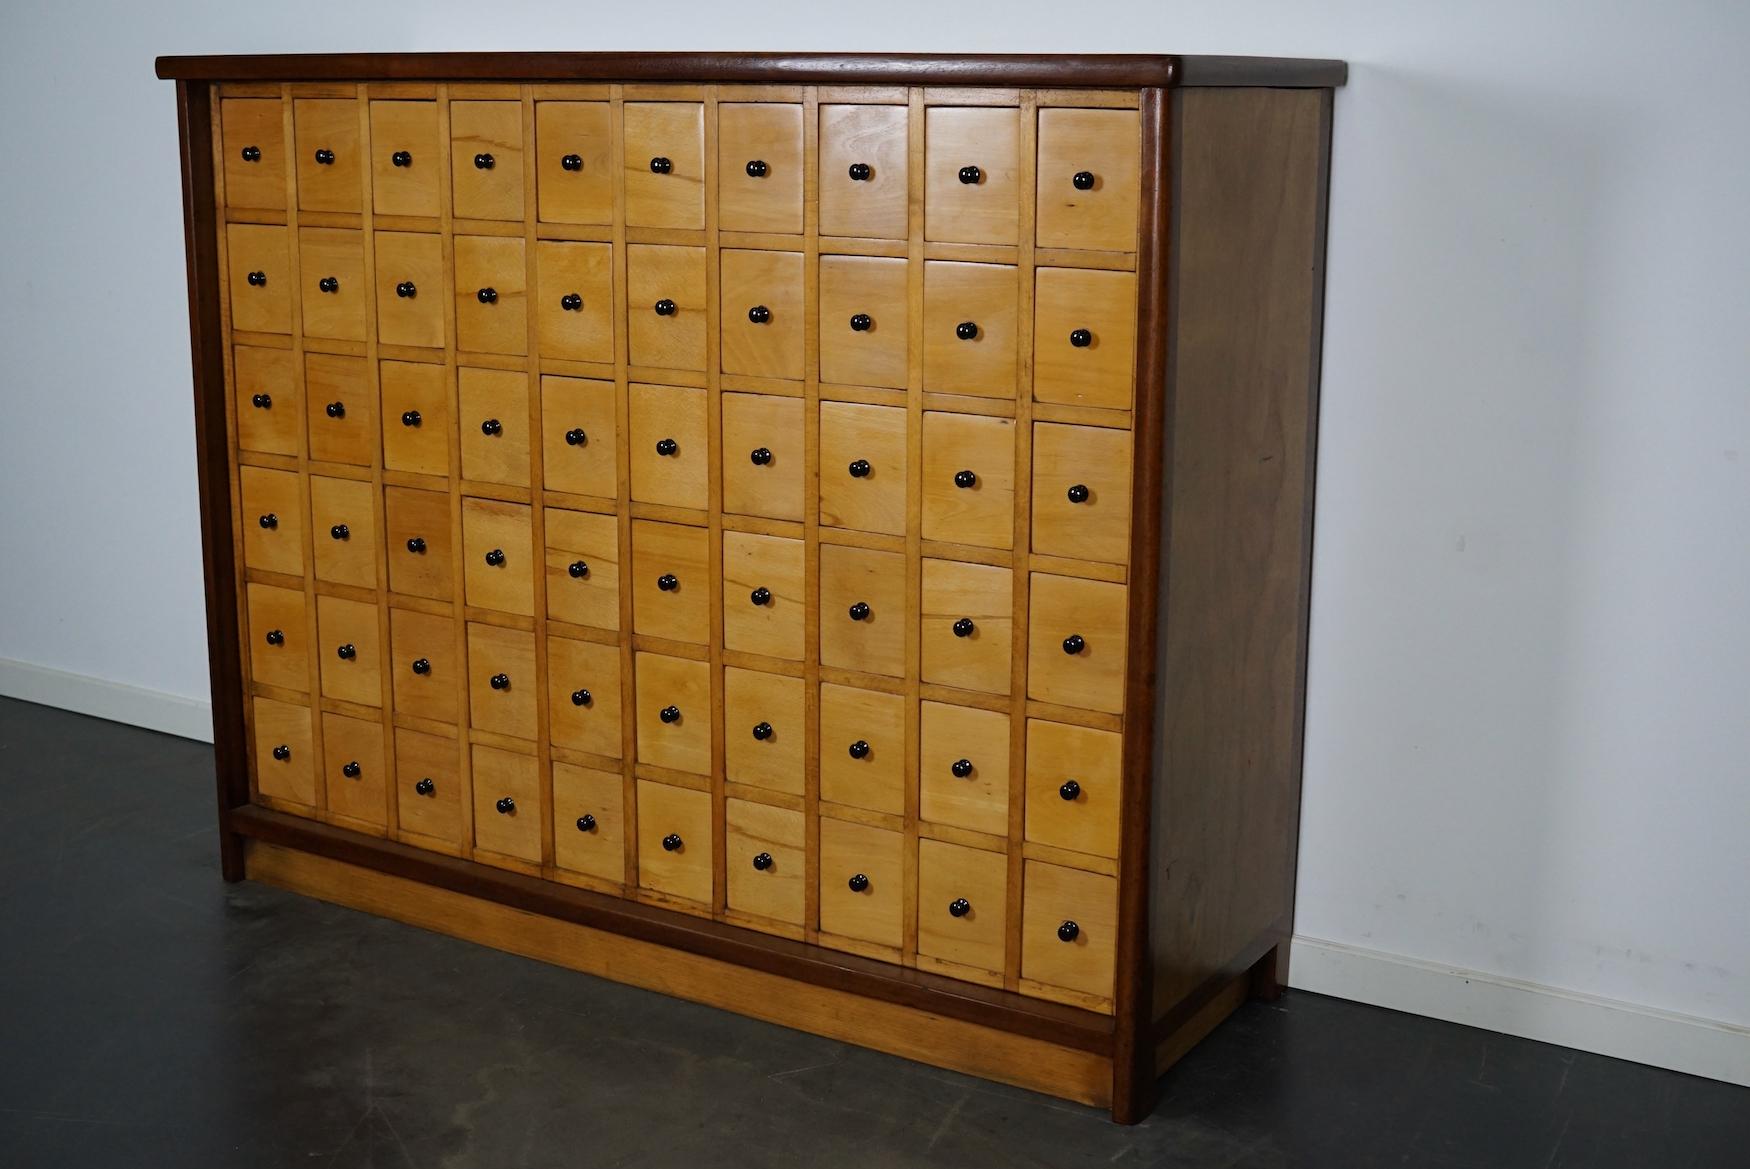 This apothecary cabinet was made circa 1950s in the Netherlands. The cabinet was used on a school to store painting supplies. It features 60 drawers with black metal knobs. The interior dimensions of the drawers are: D W H 37 x 9 x 13 cm.